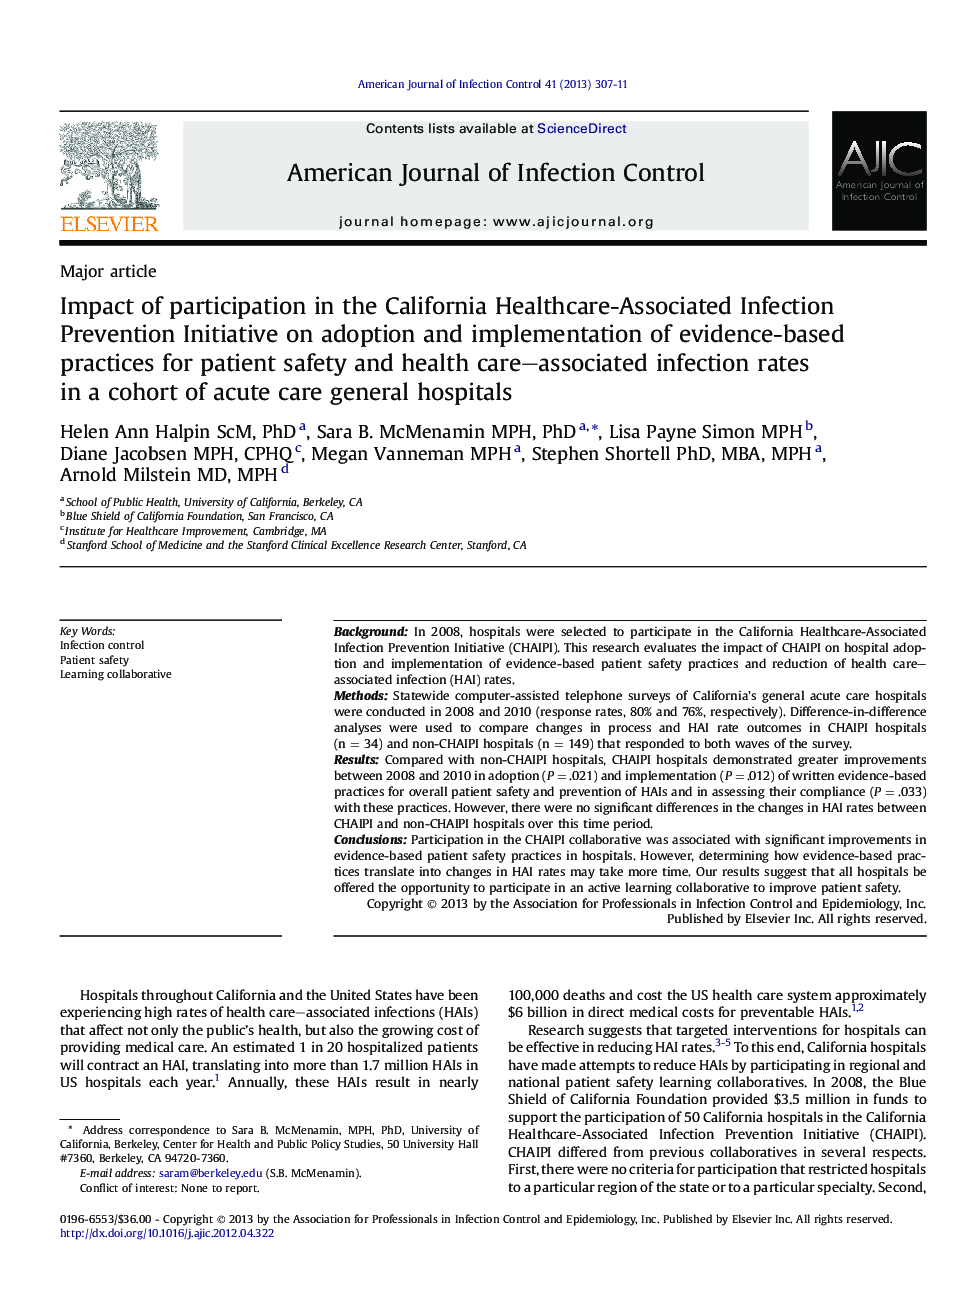 Impact of participation in the California Healthcare-Associated Infection Prevention Initiative on adoption and implementation of evidence-based practices for patient safety and health care–associated infection rates in a cohort of acute care general hosp